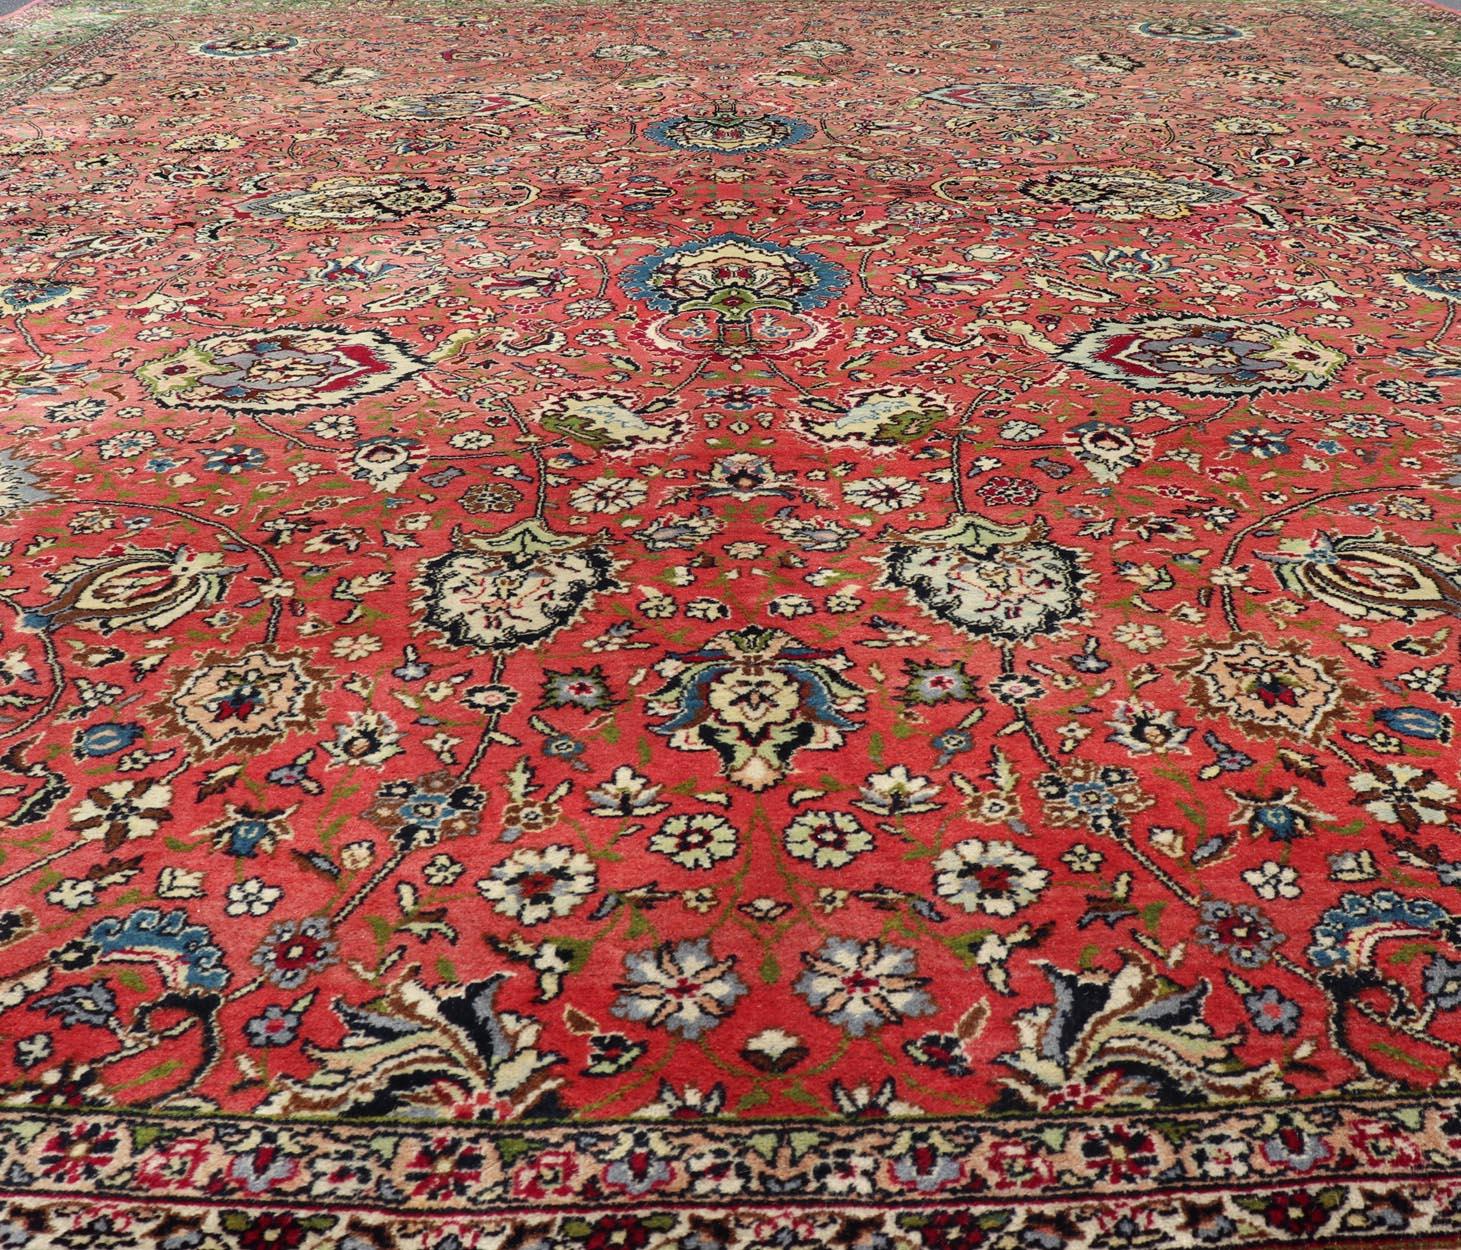 Large Square Size Vintage Persian Tabriz Rug  in Coral Pink and Acid Green In Excellent Condition For Sale In Atlanta, GA